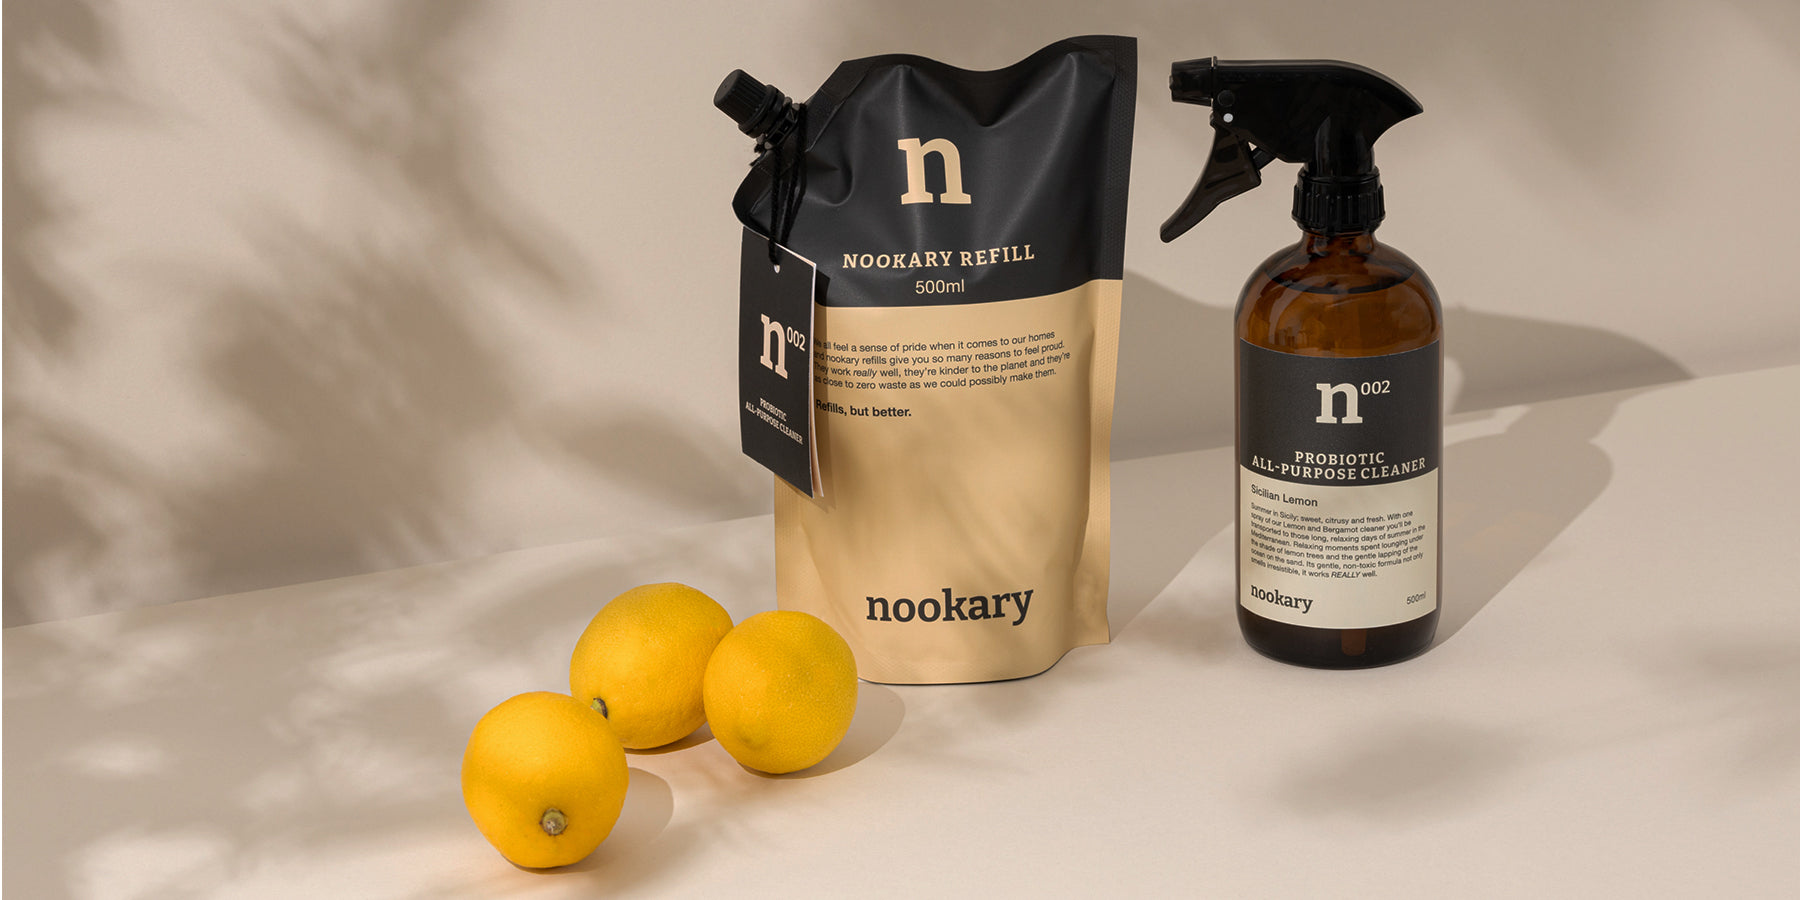 nookary probiotic all purpose cleaner and pouch